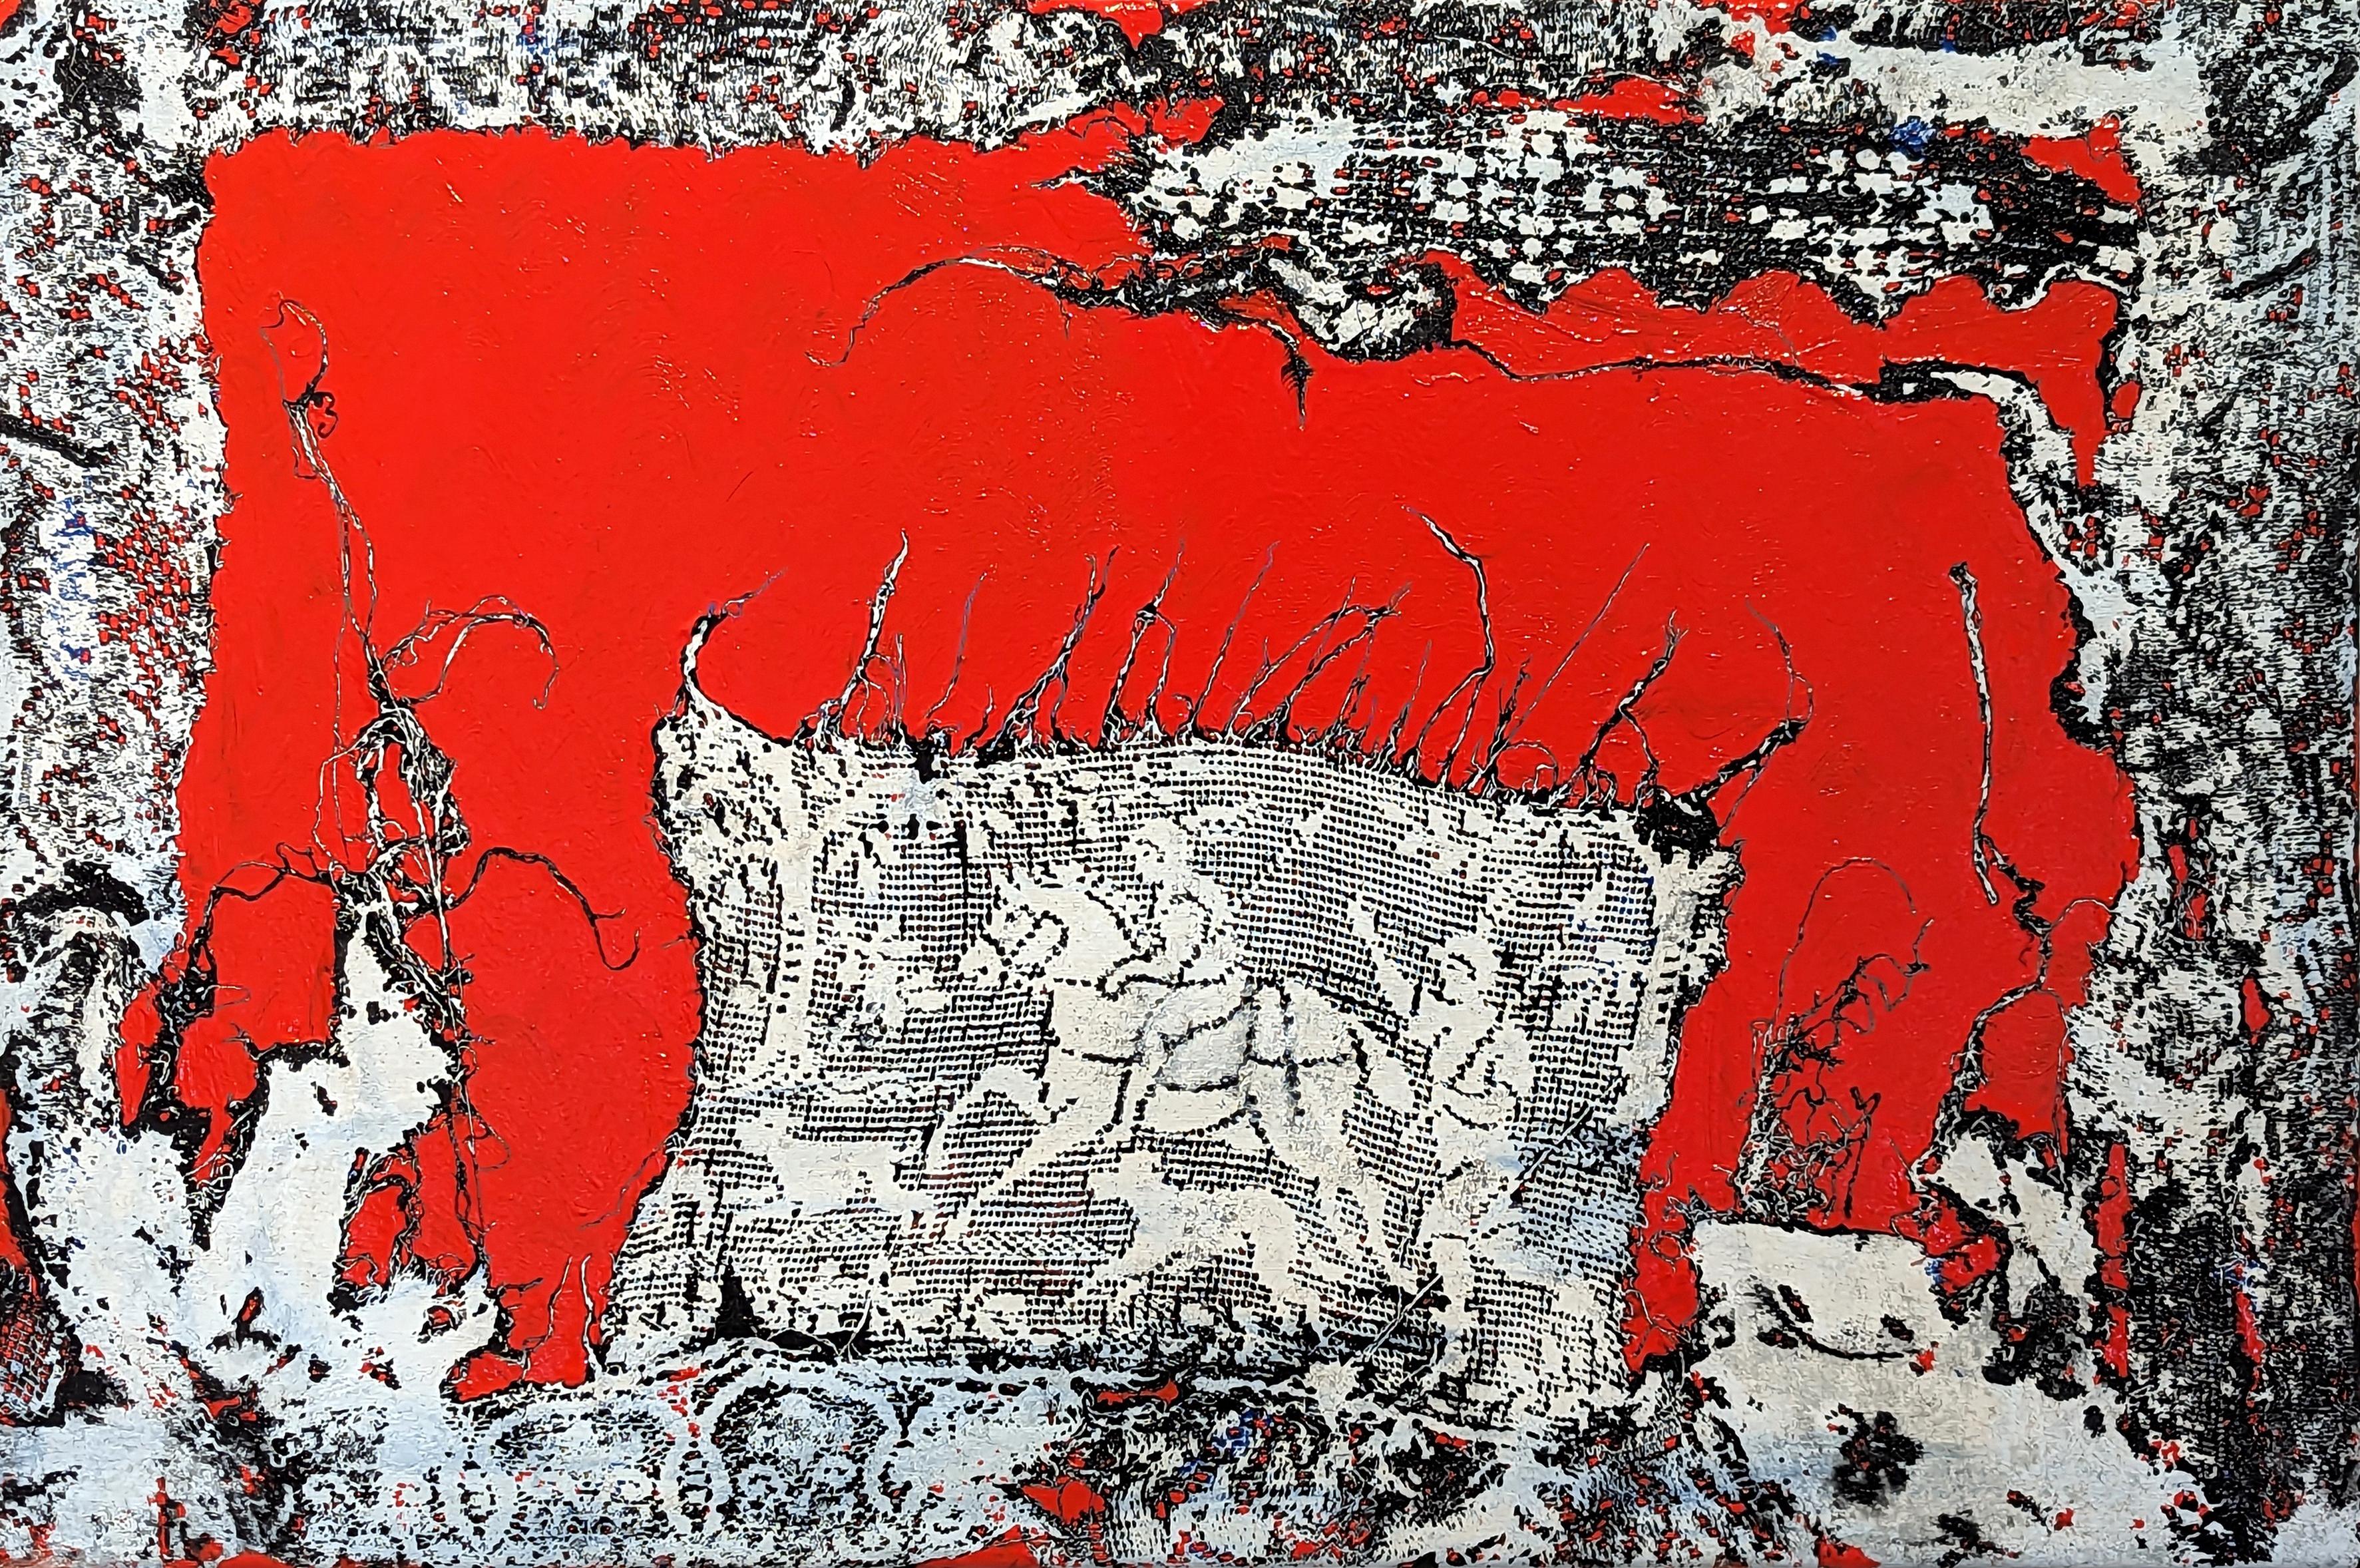 Mark Flood Abstract Painting - “Red Hunt” Contemporary Red, Black, & White Abstract Lace Painting